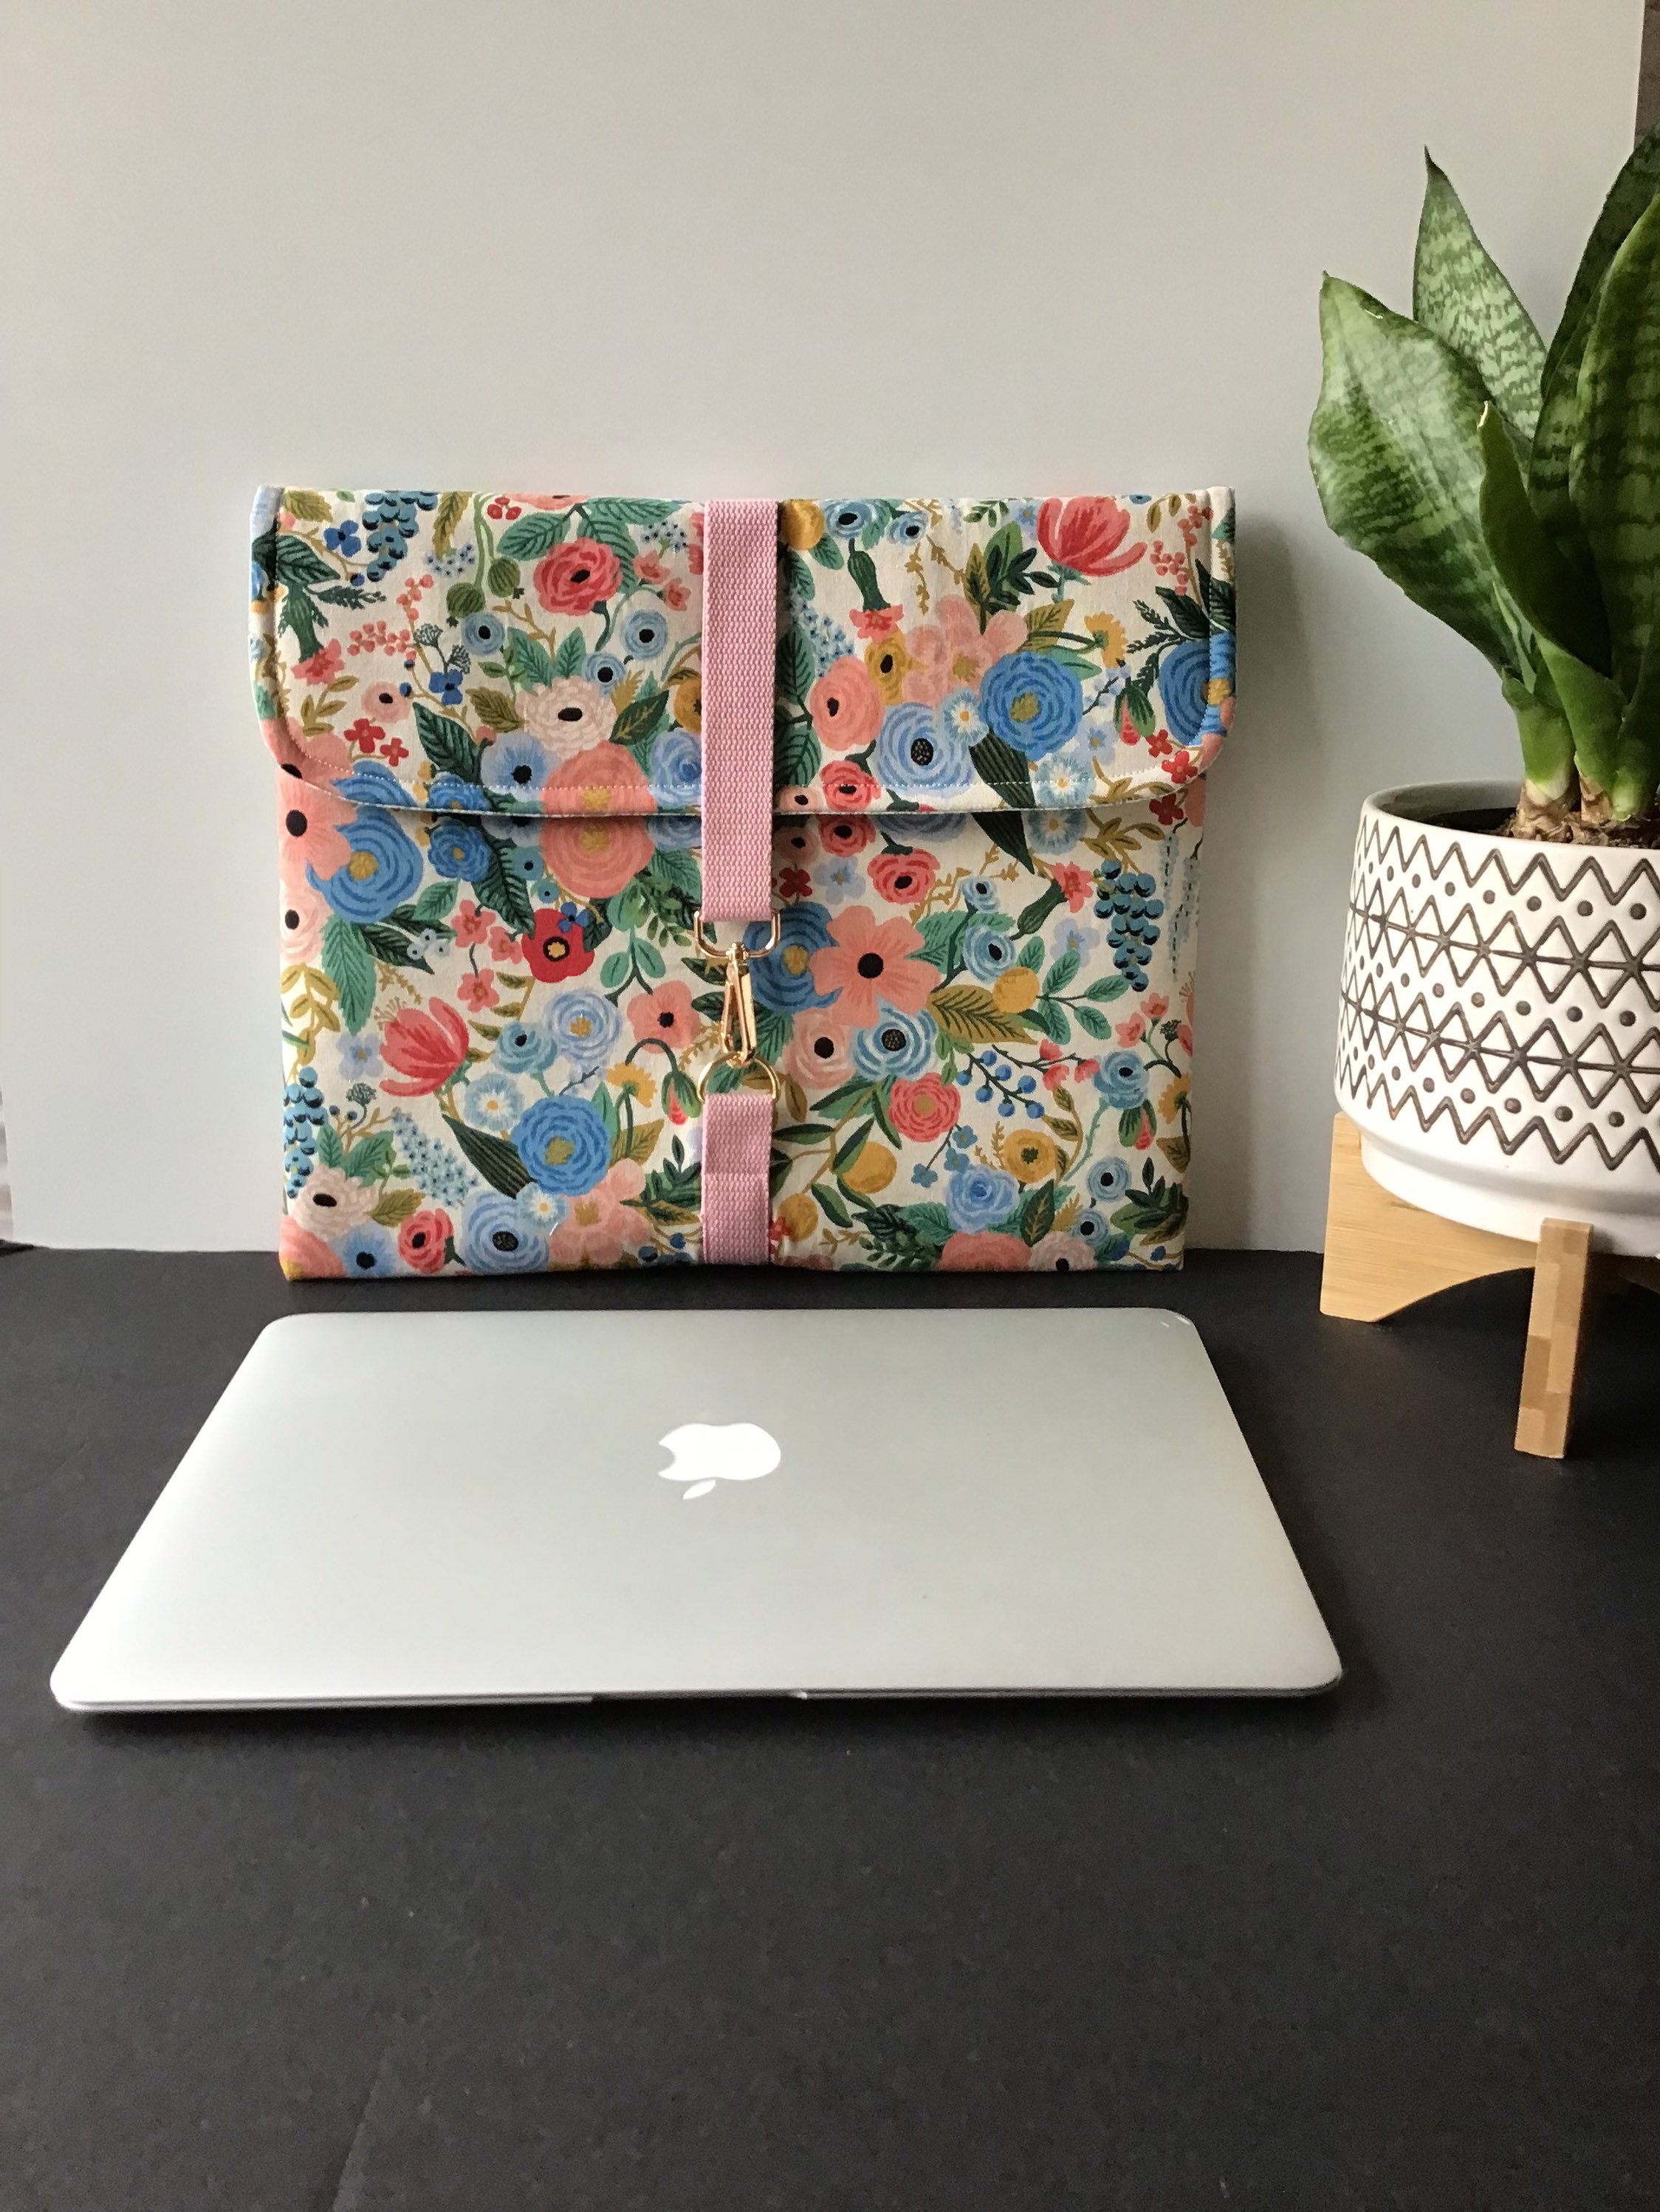  Rifle Paper Co. Laptop Sleeve 14” - Laptop Carrying Case with  Padded Exterior, Satin Interior, Metallic Zipper - Floral Laptop Bag For  MacBook Pro/Air M2 13 inch, HP, Asus, Dell 